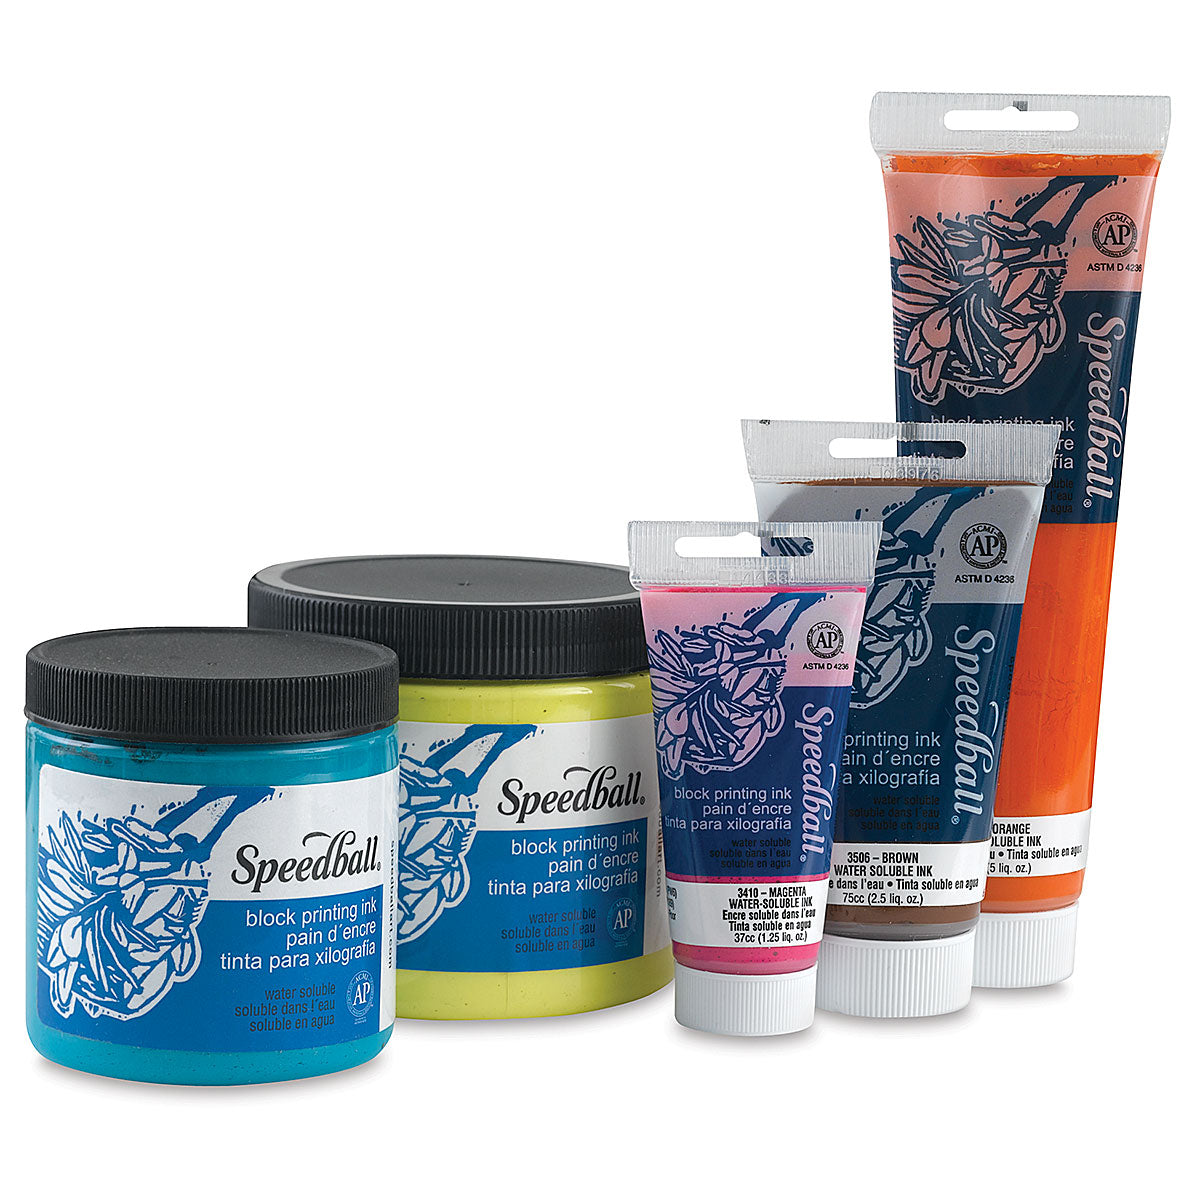 Speedball Block Printing Ink | Oil and Cotton